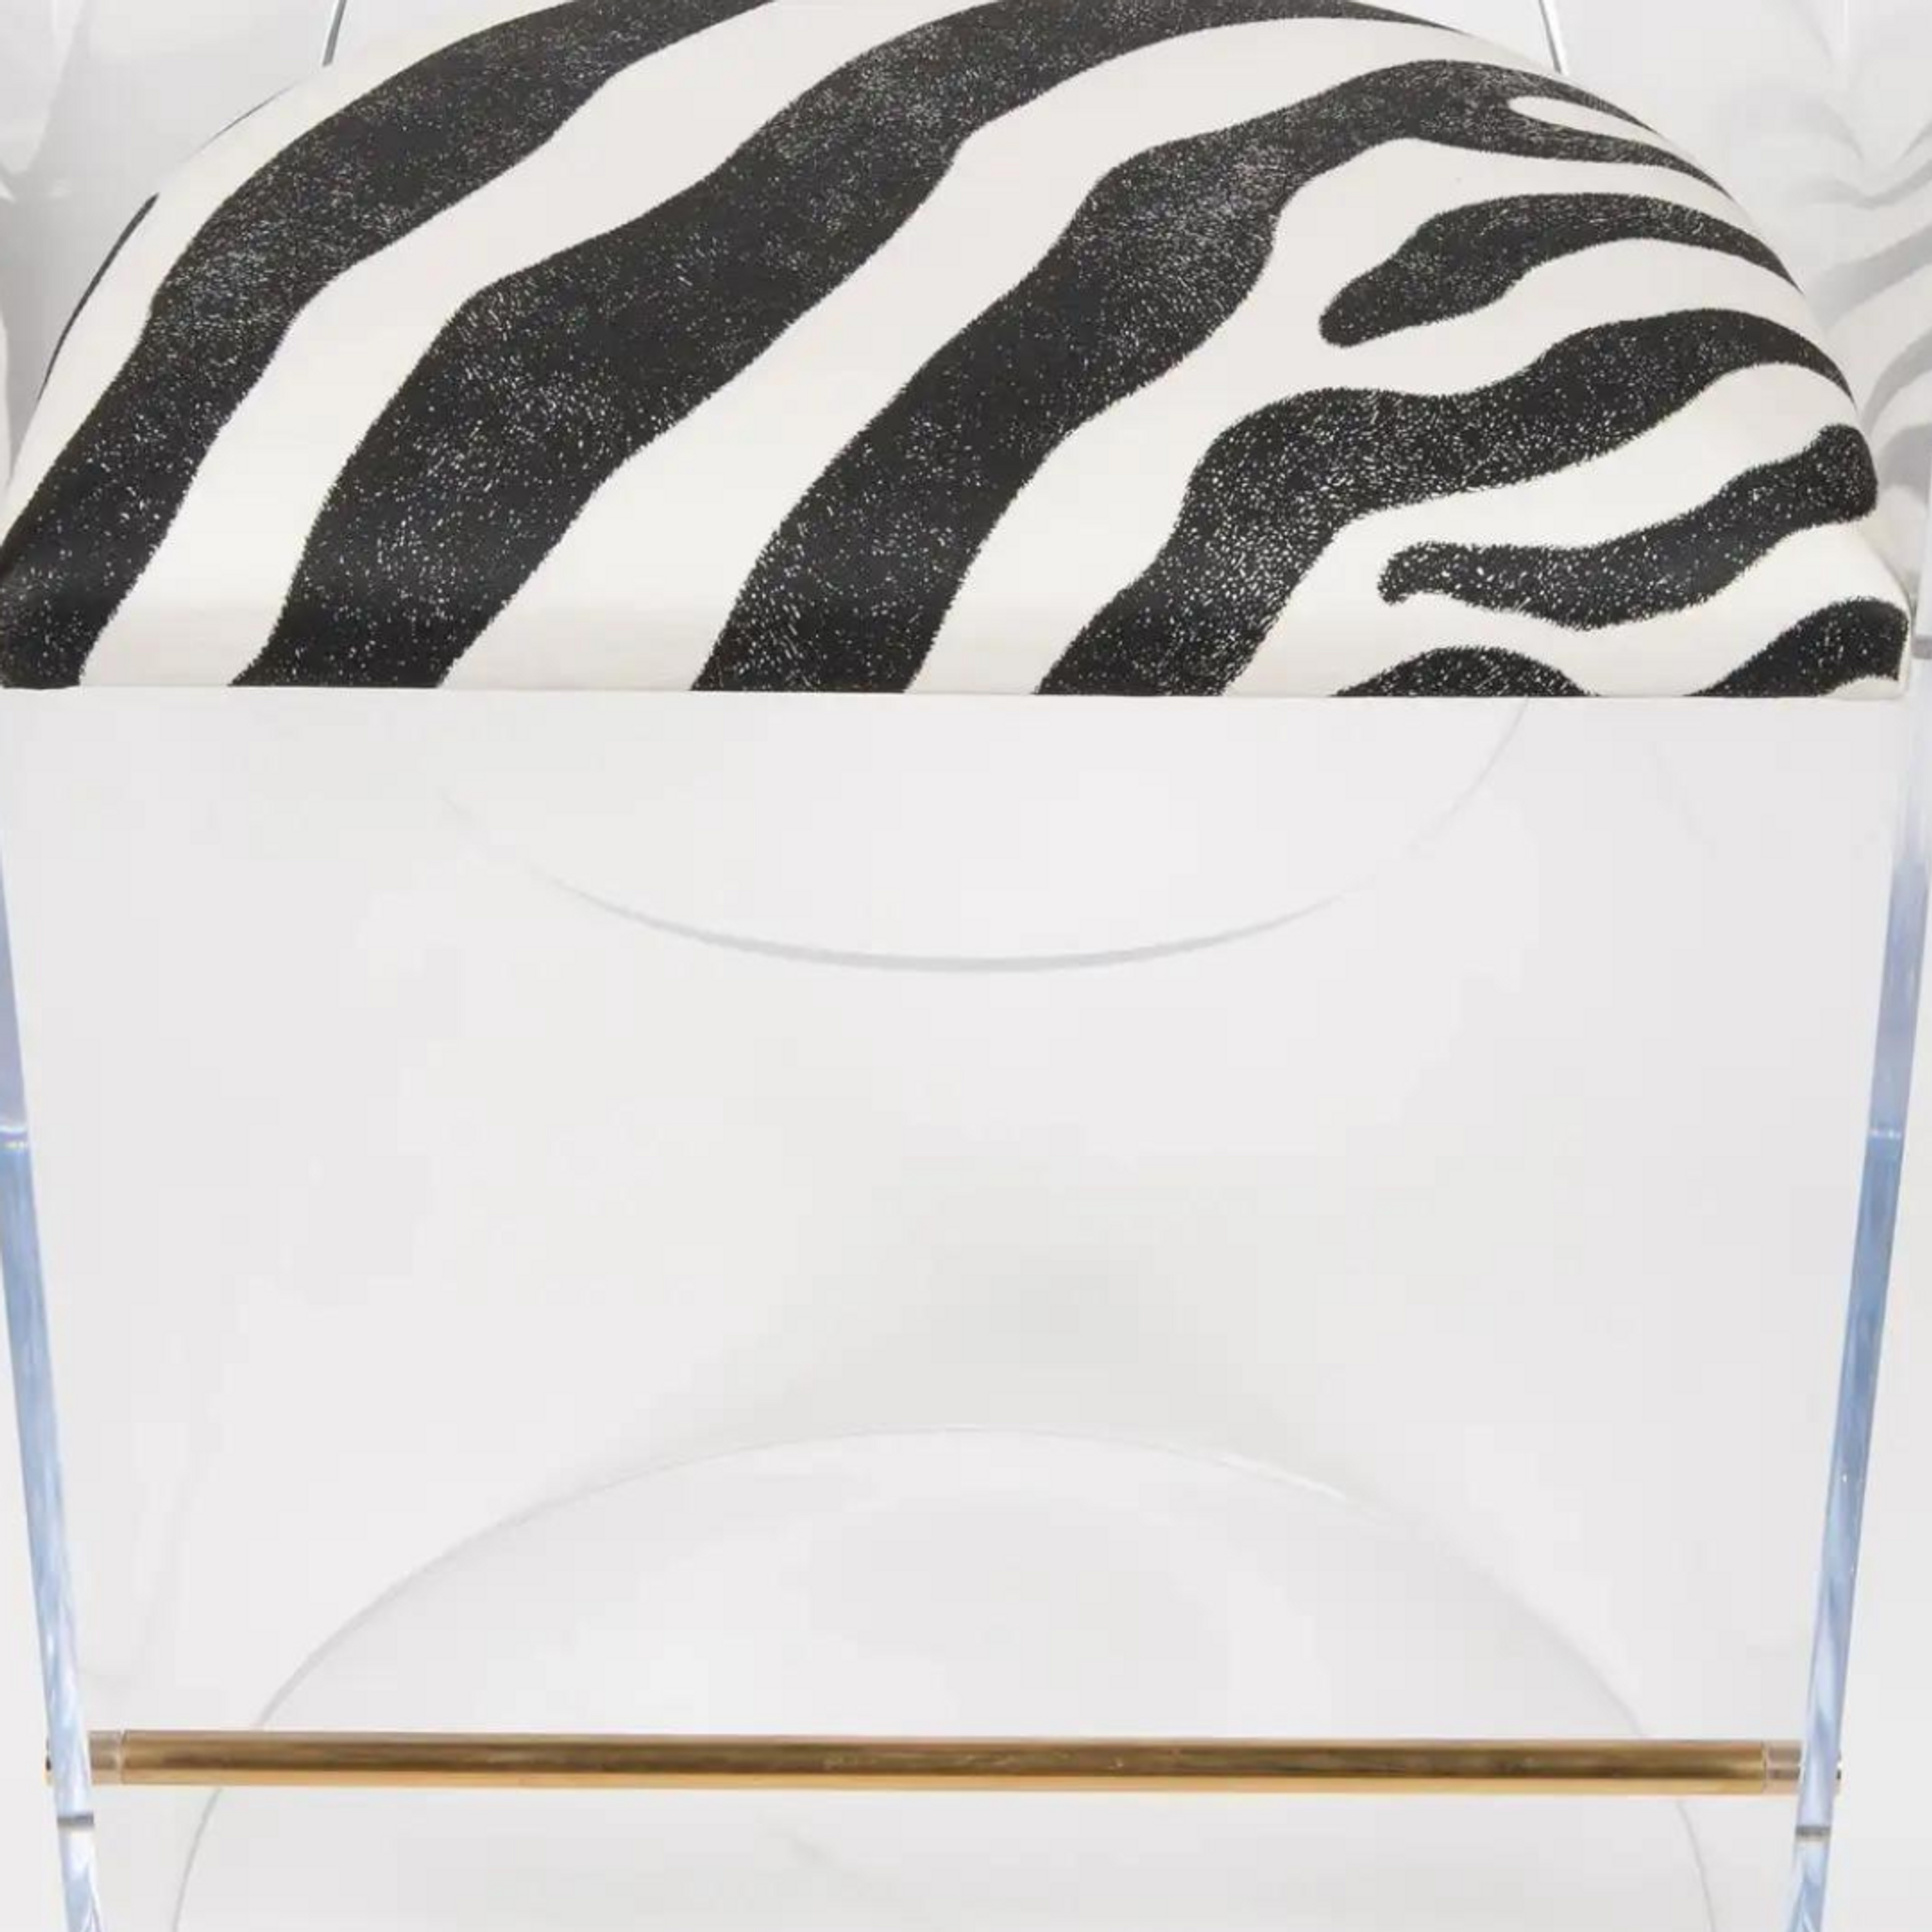 Acrylic Barrel Counter Stool with Zebra Printed Seat